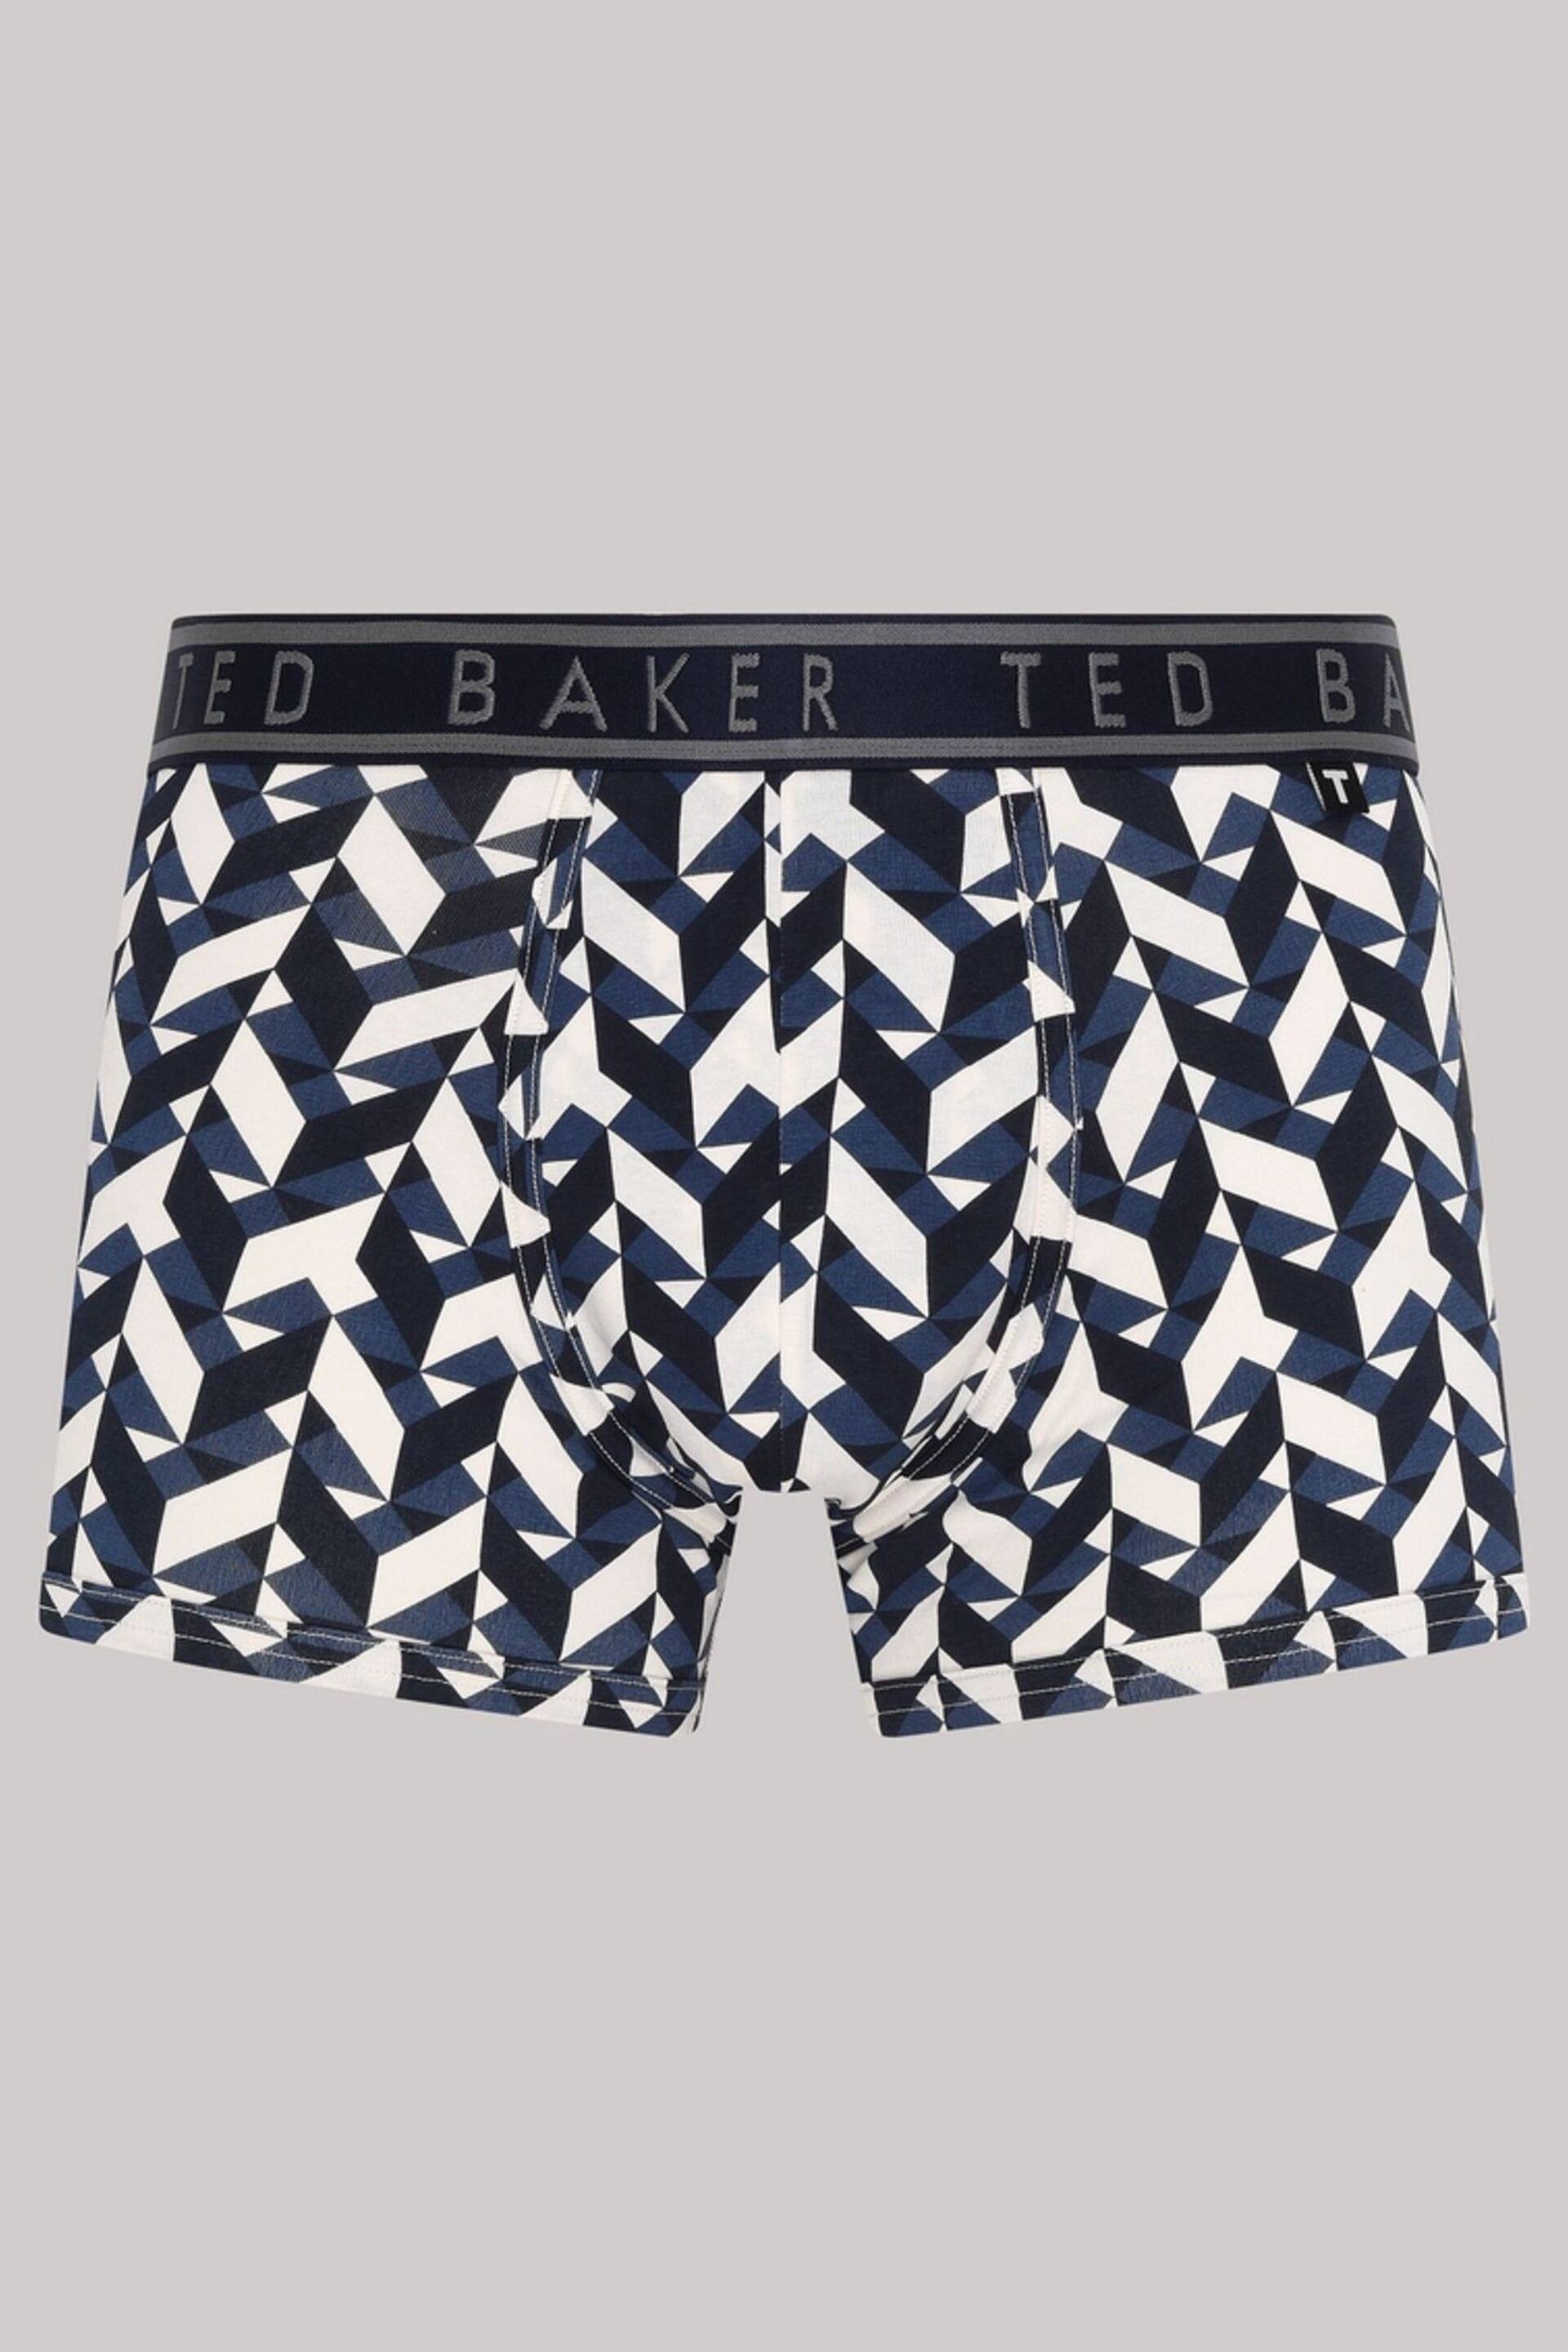 Ted Baker Blue Cotton Trunks 3 Pack - Image 3 of 6